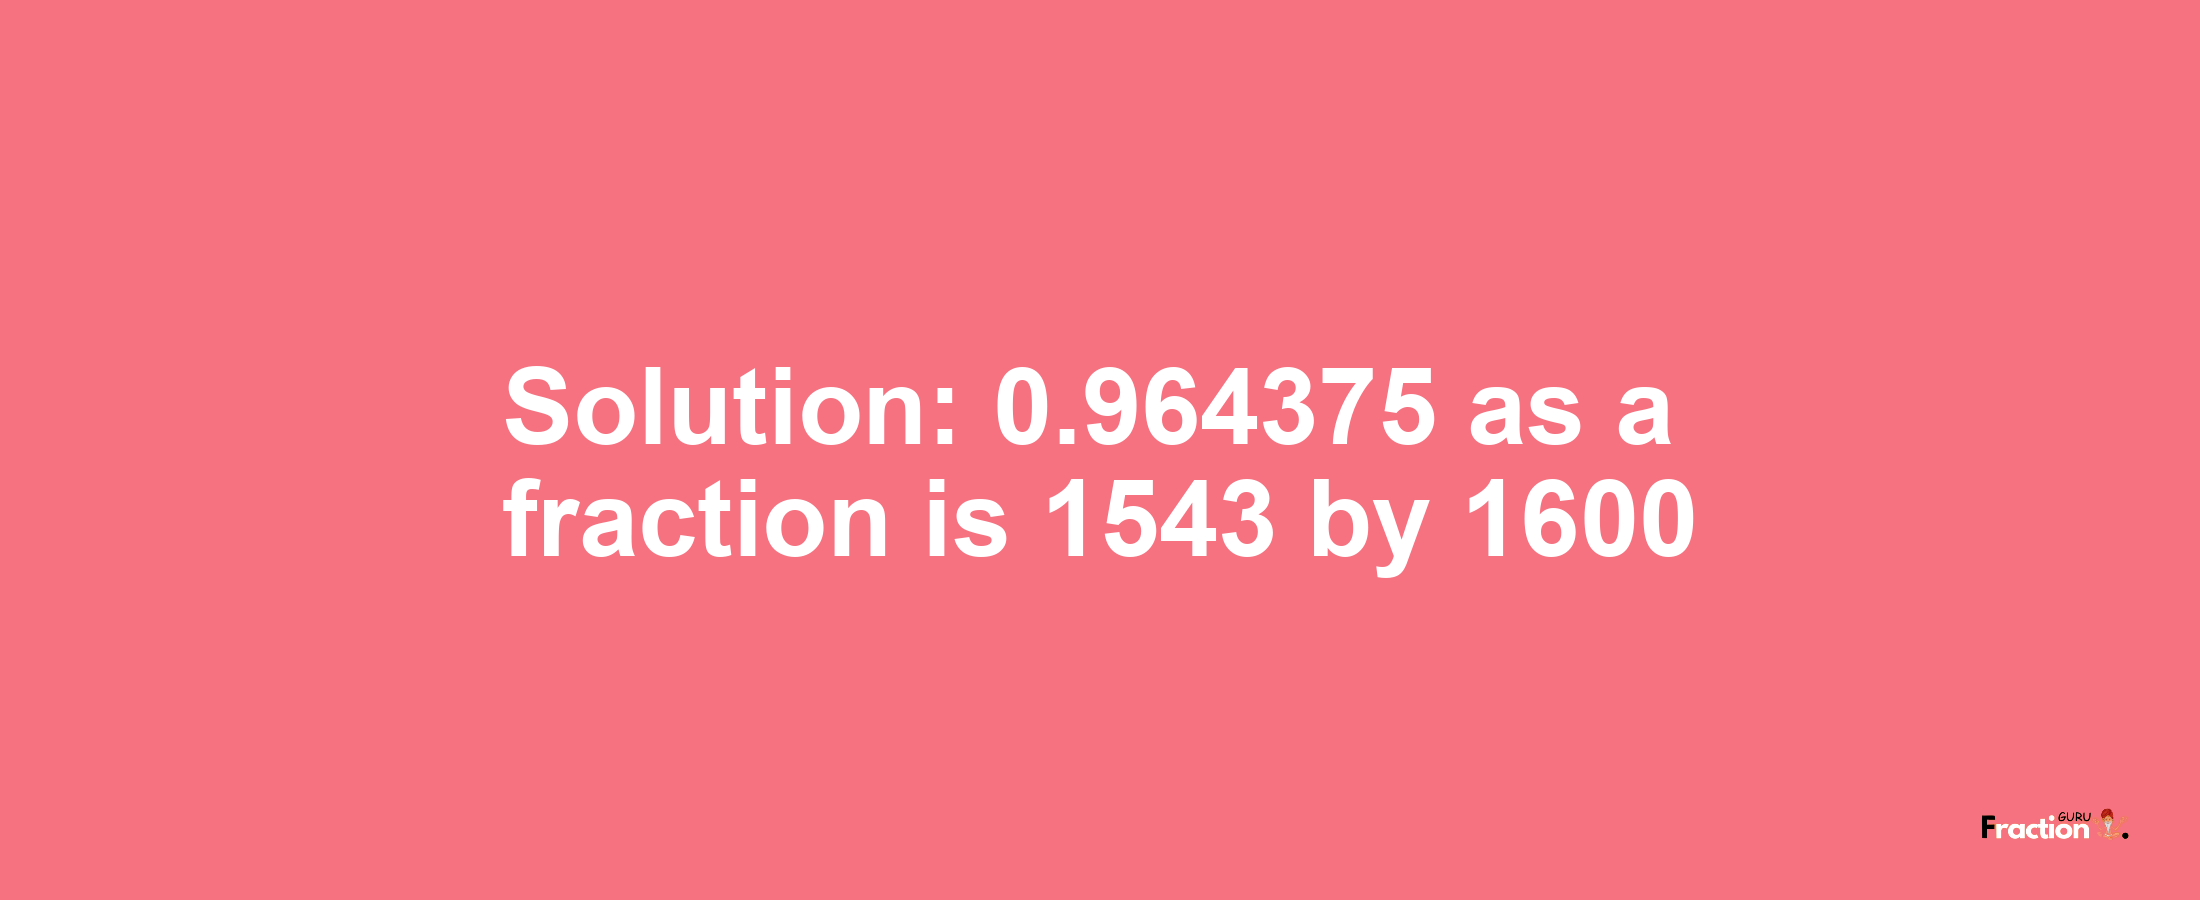 Solution:0.964375 as a fraction is 1543/1600